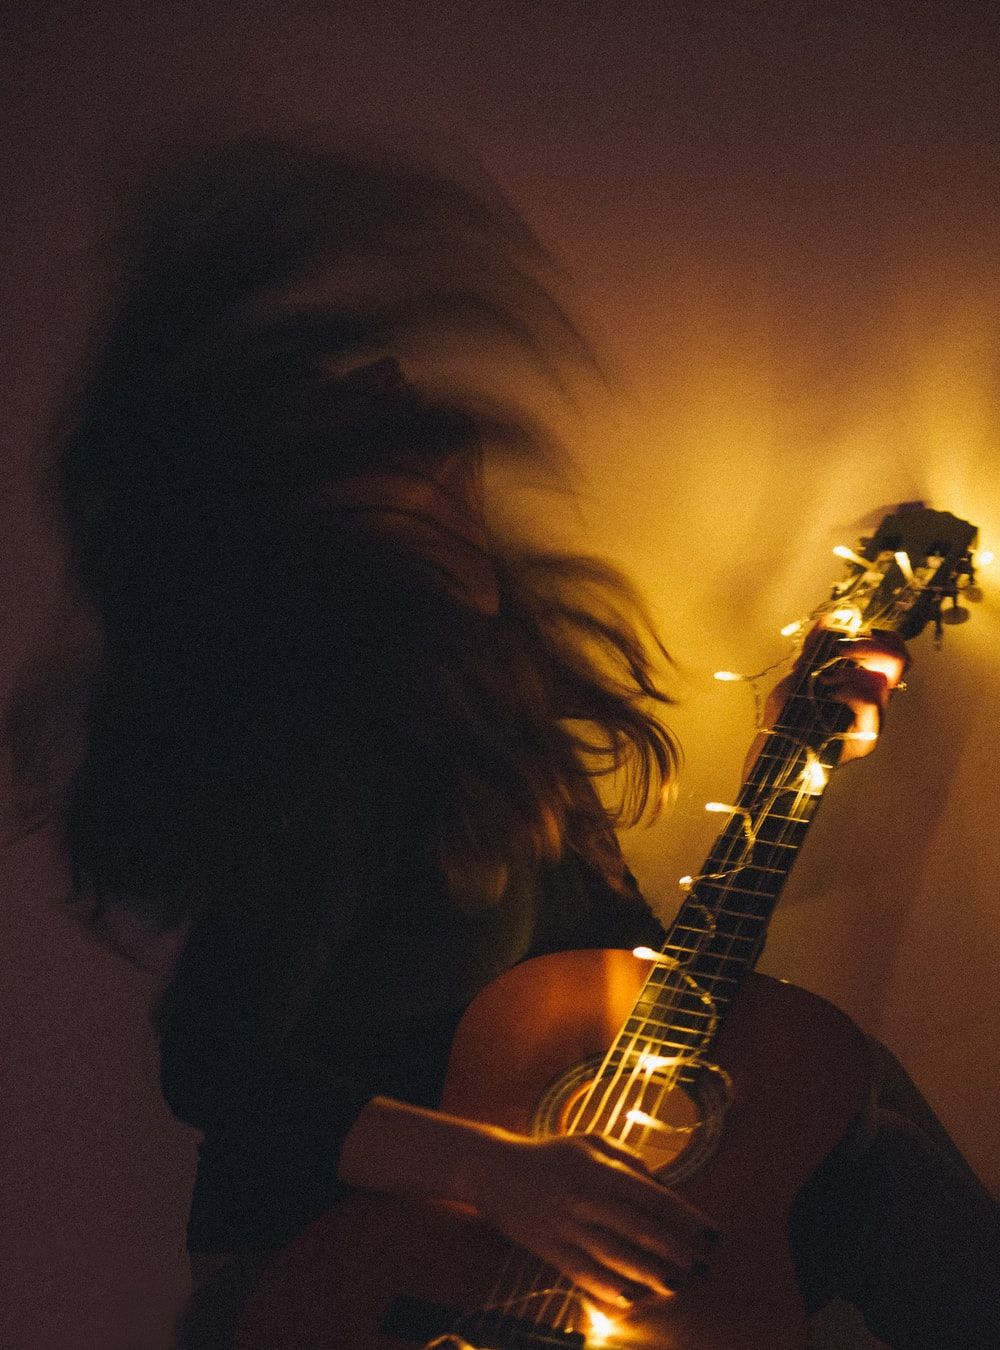 Girl With Guitar Picture [HQ]. Download Free Image & Stock